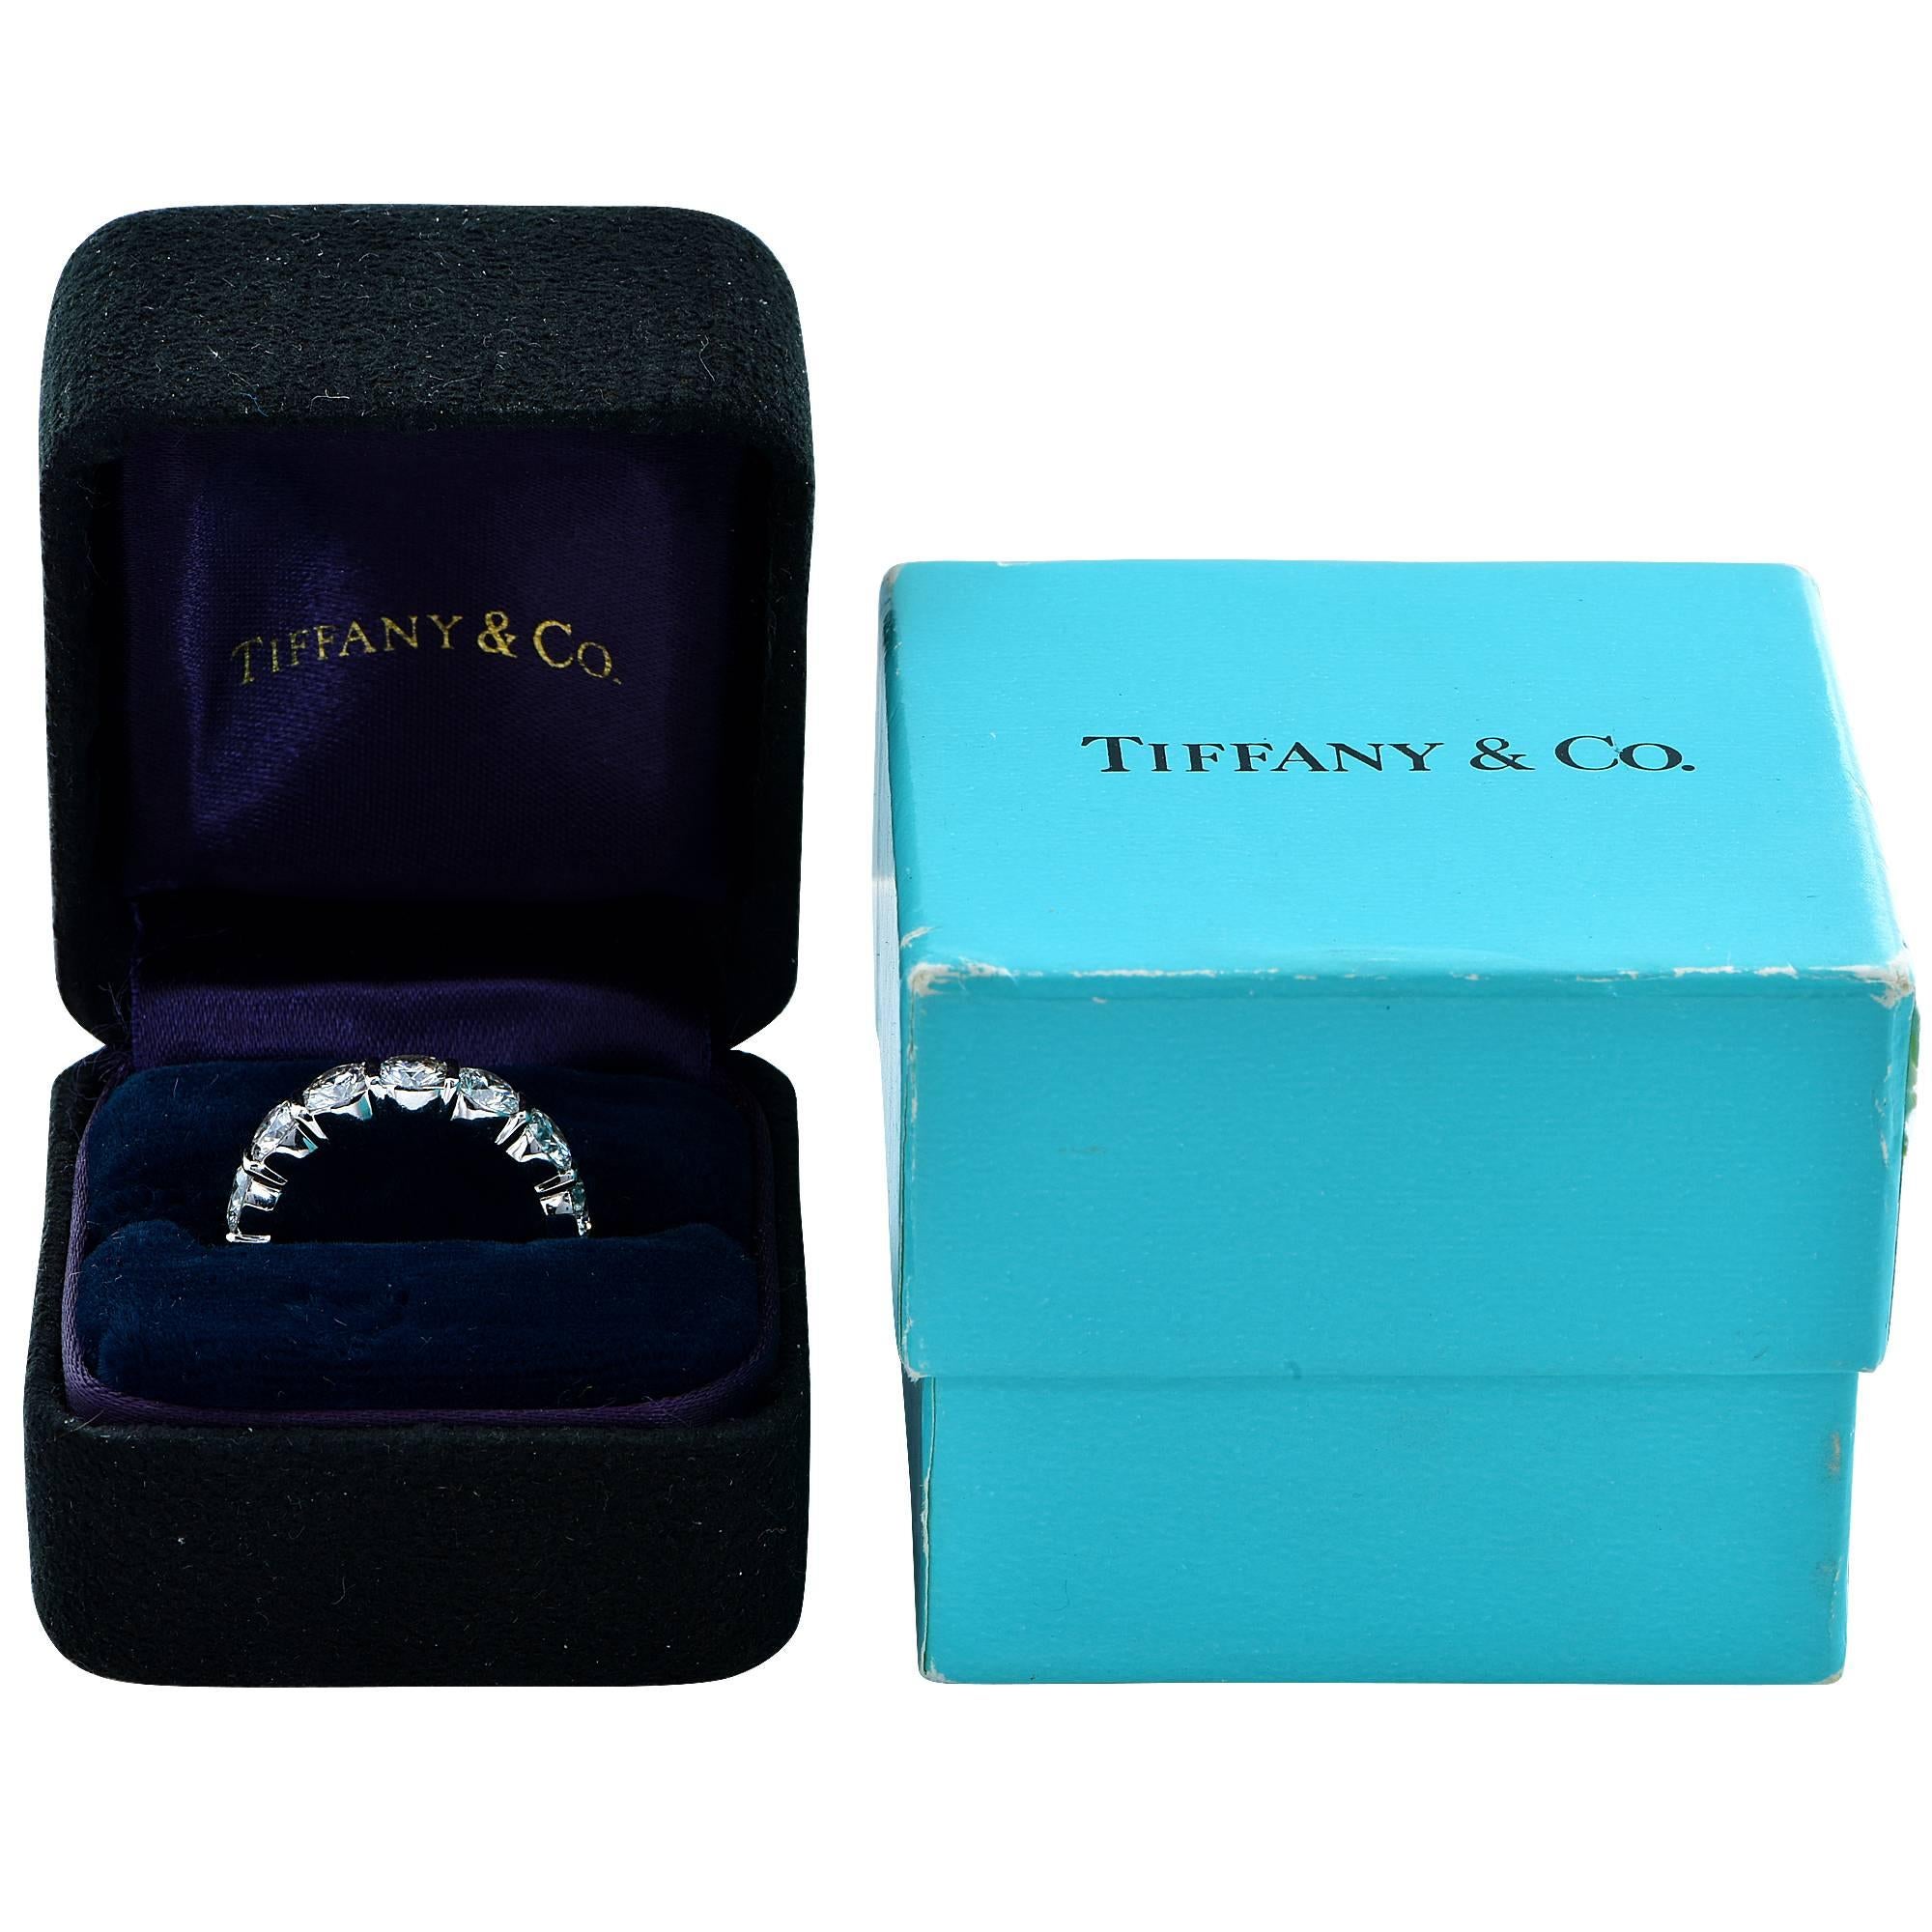 This beautiful Tiffany & Co. eternity band is in like new condition. It features 14 hand picked matching round brilliant cut diamonds weighing 4.40cts G-H color and VVS-VS clarity.

The ring is a size 5 and cannot be sized up or down.
It is